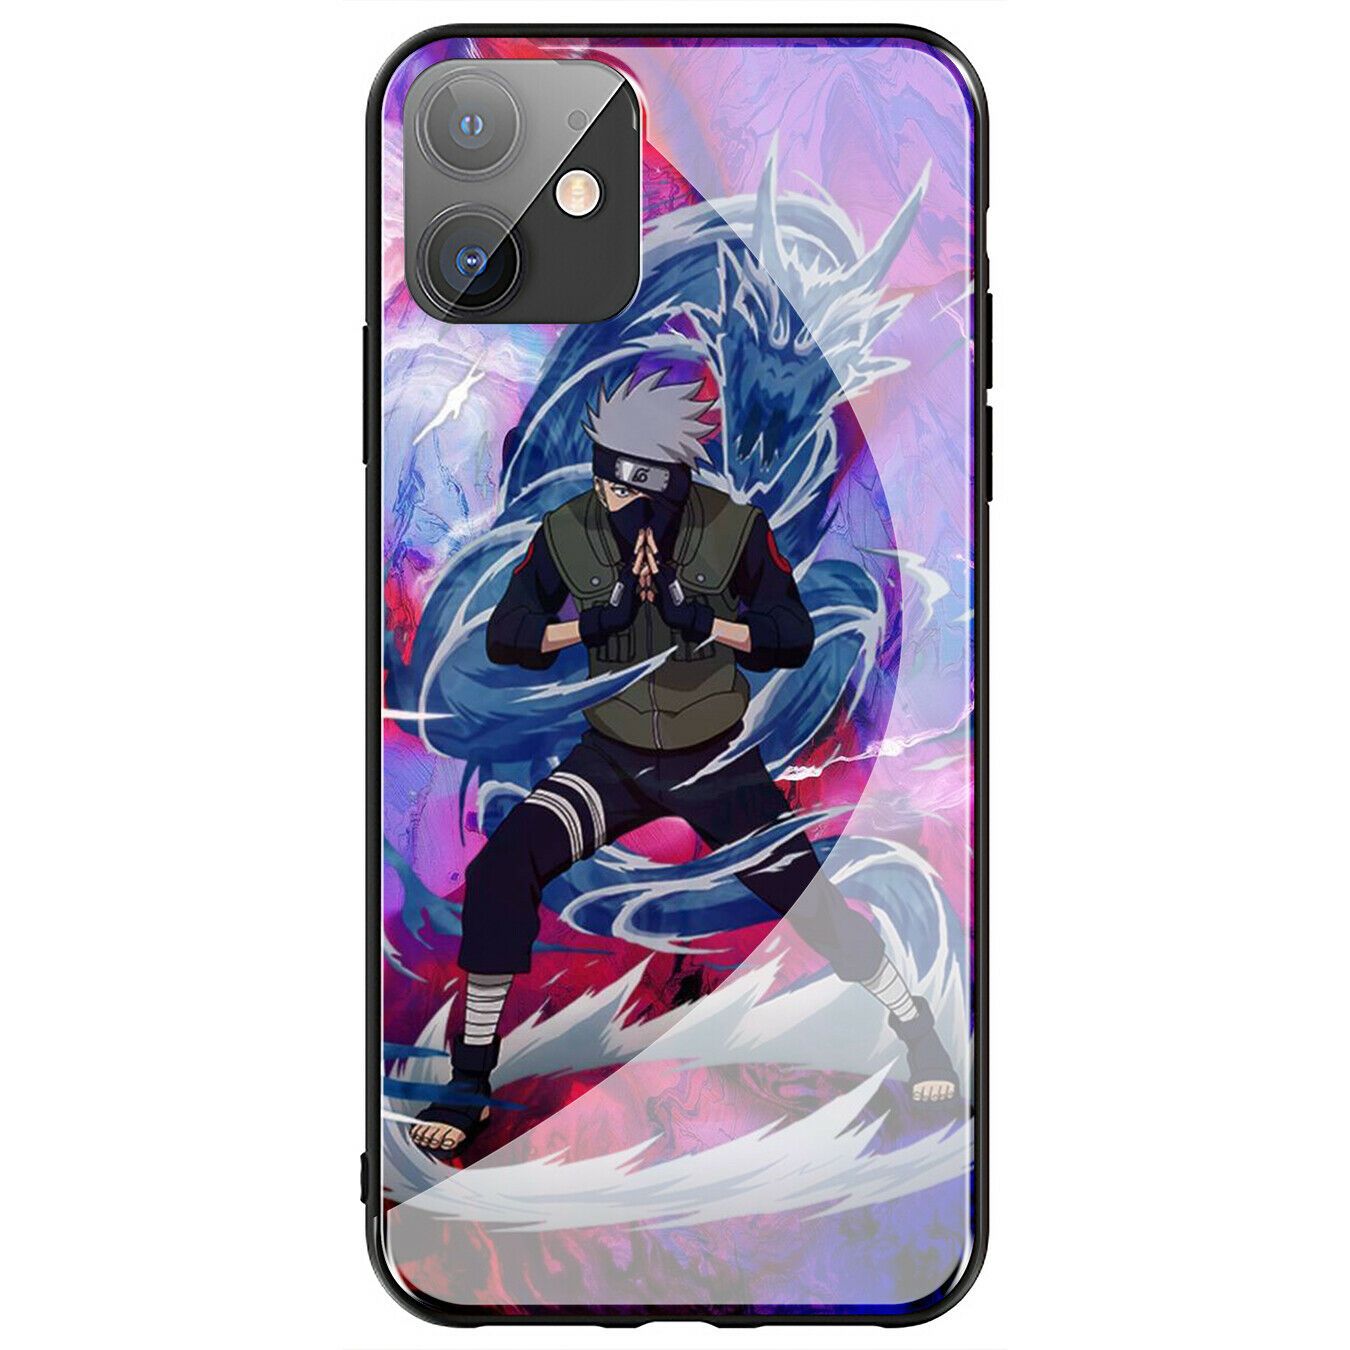 Sasuke NARUTO Akatsuki Glass Case for iPhone 11 Pro XR X XS Max 8 7 6 6s Plus + iPhone Cases AtlasCase 16 for iPhone 6/6S 